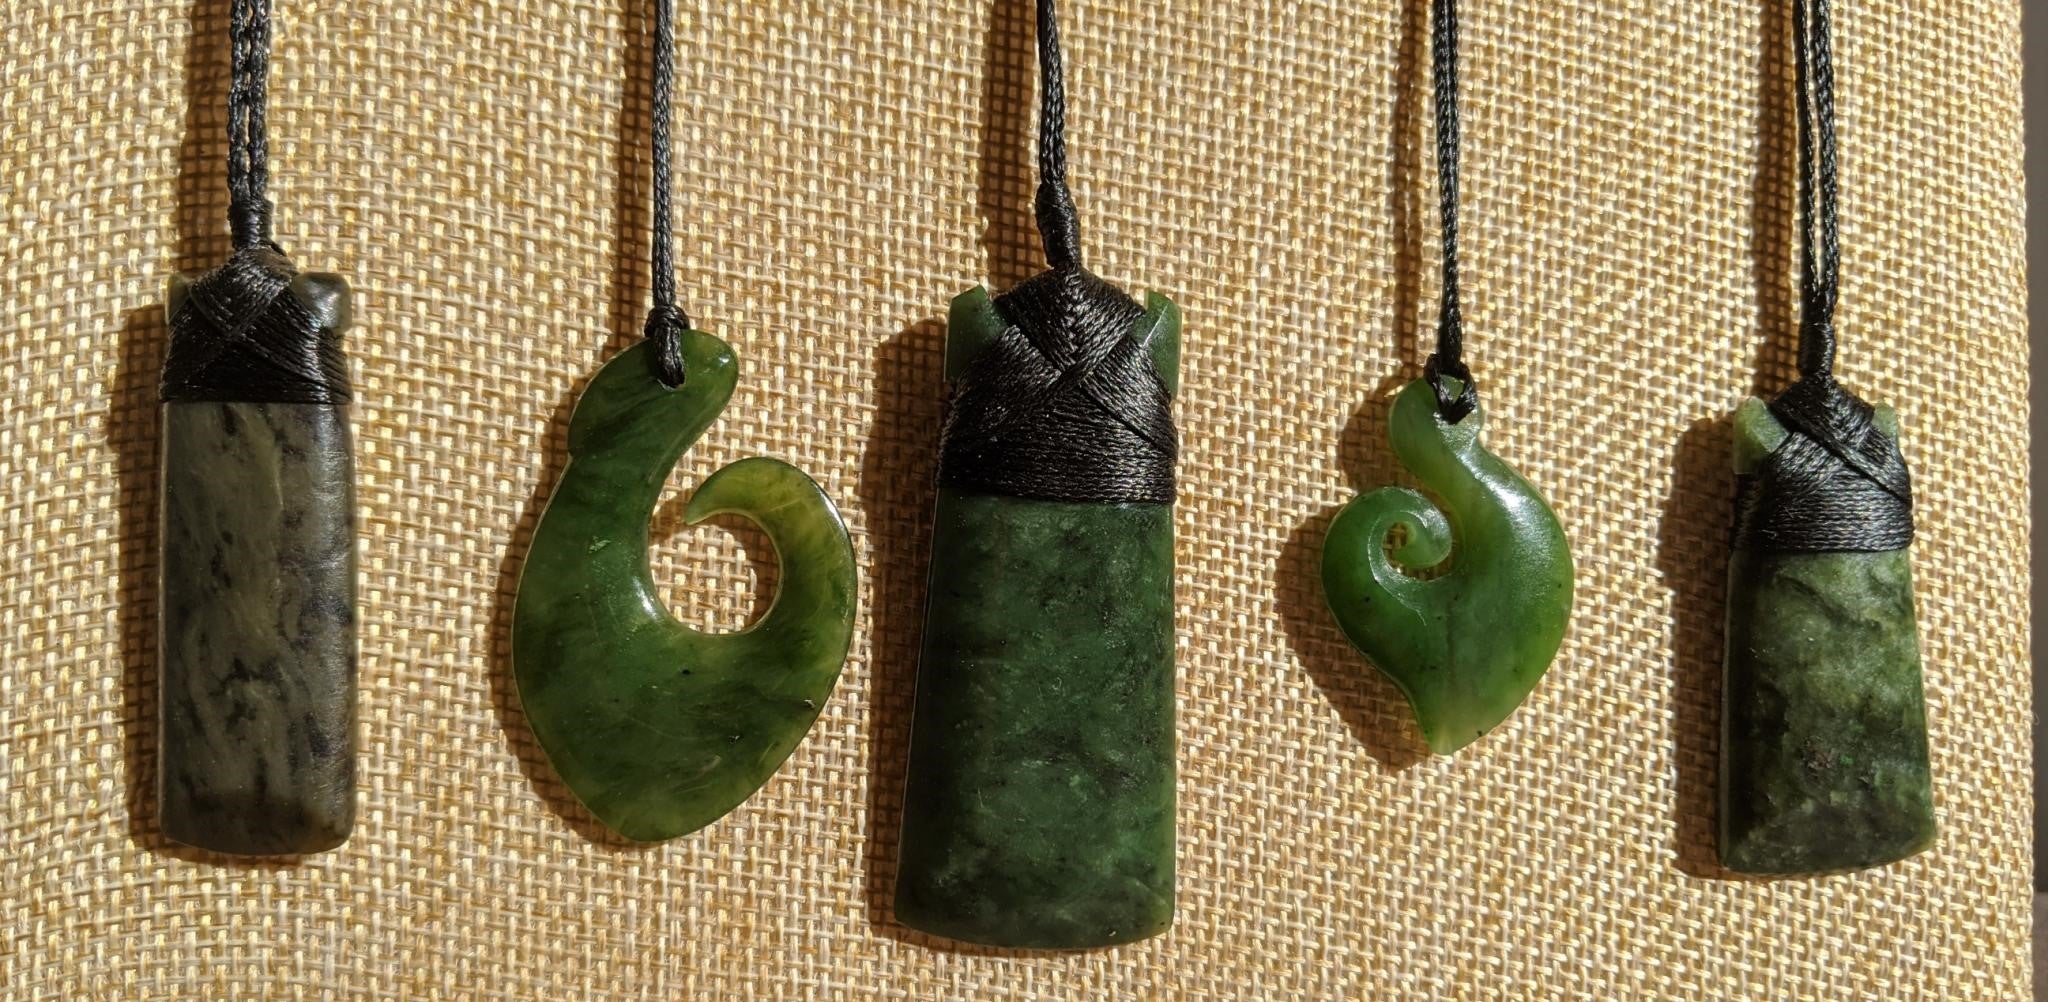 ARANGA 67 Naturally Shaped New Zealand Greenstone Pounamu With Heart Charm  on a Hypoallergenic Stainless Steel Cable Chain Silver Necklace - Etsy